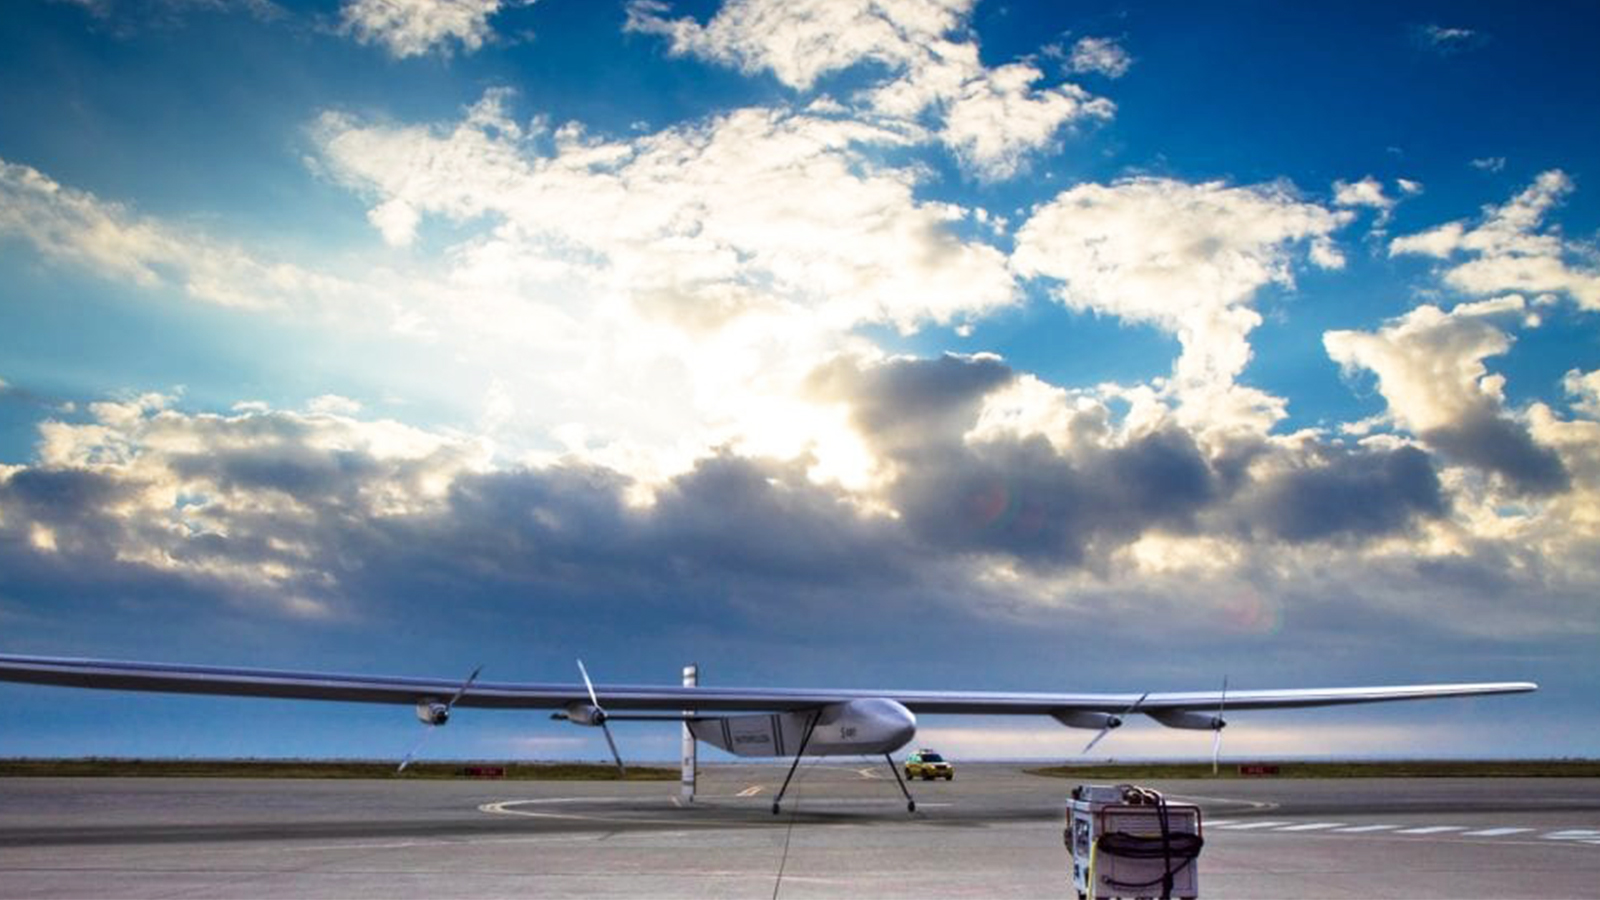 The US Navy is building a solar airplane - Freethink